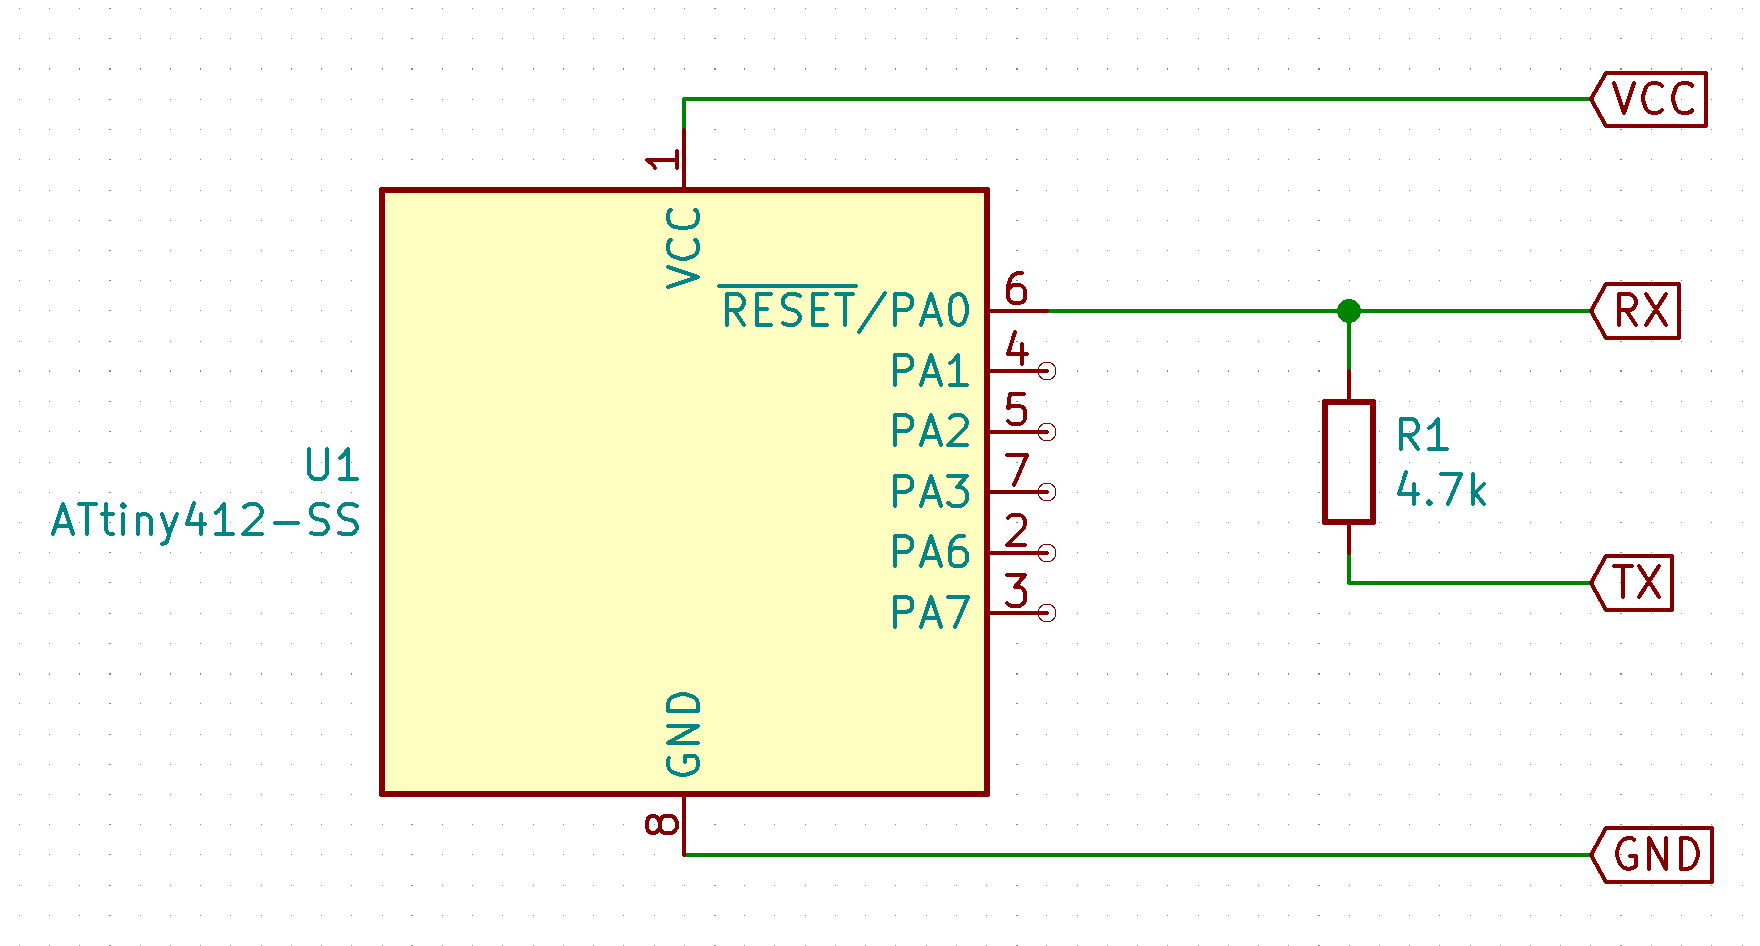 ATtiny412 connections to the UPDI programmer